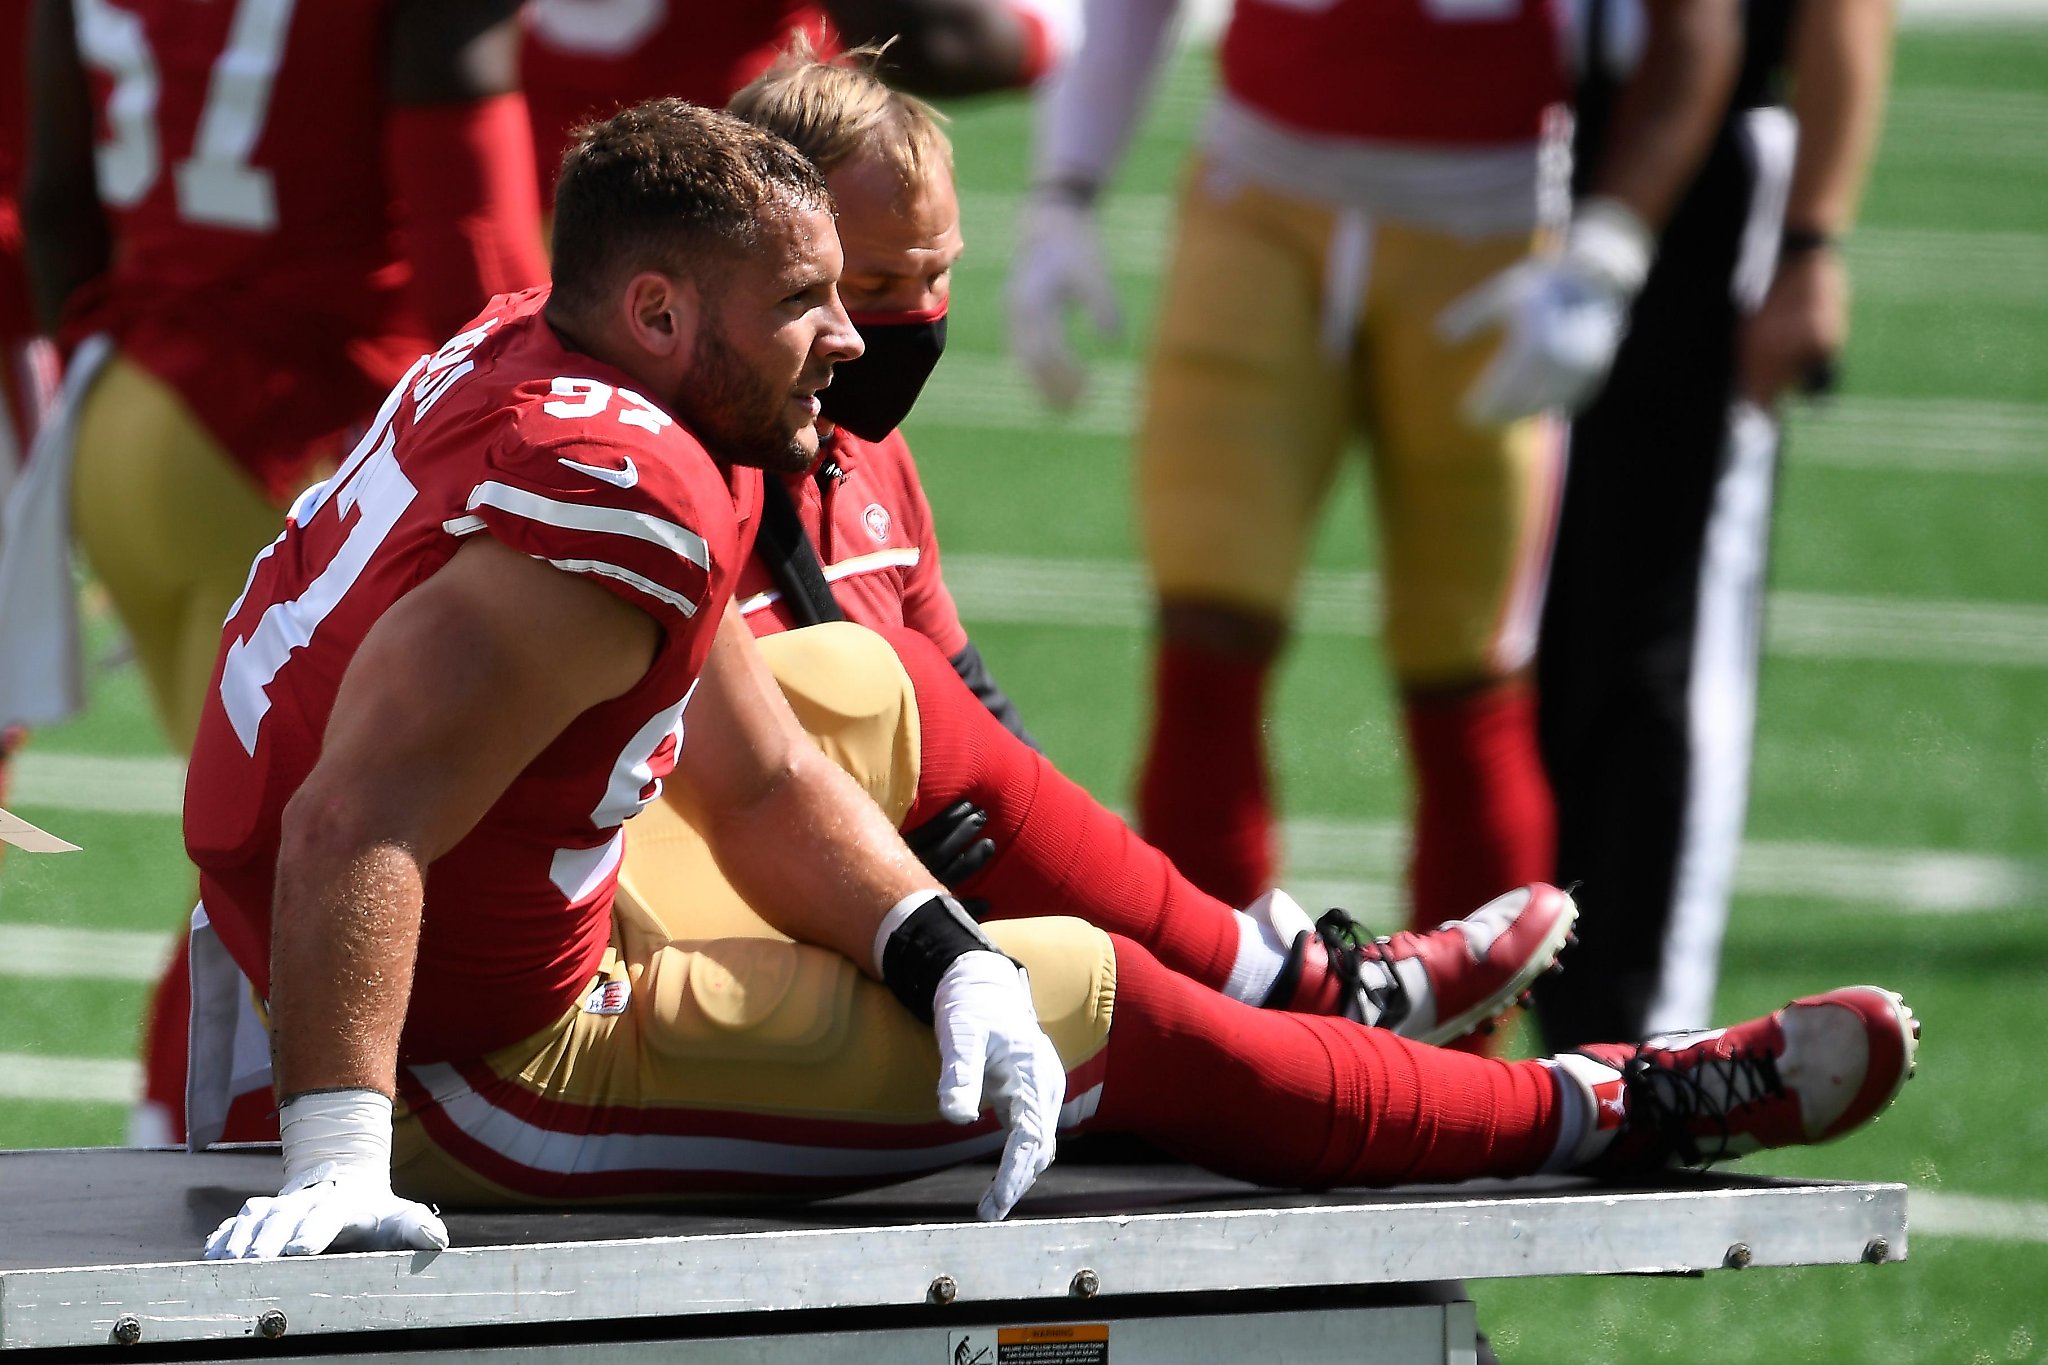 After avalanche of injuries, Shanahan says 49ers rethinking ‘risk-reward’ on players